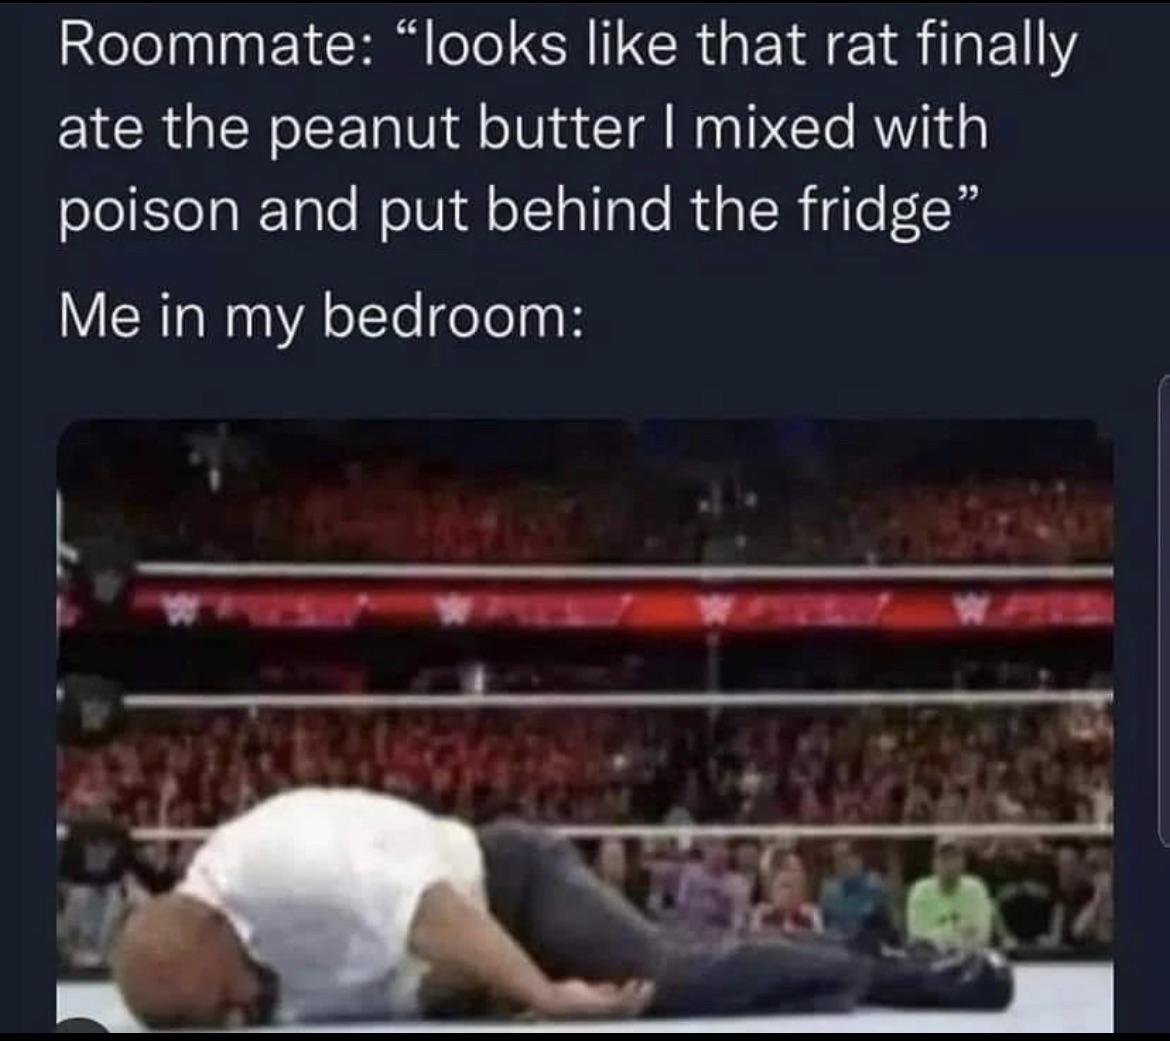 dank memes - mom leaves out poison bread for the rat meme - Roommate "looks that rat finally ate the peanut butter I mixed with poison and put behind the fridge" Me in my bedroom